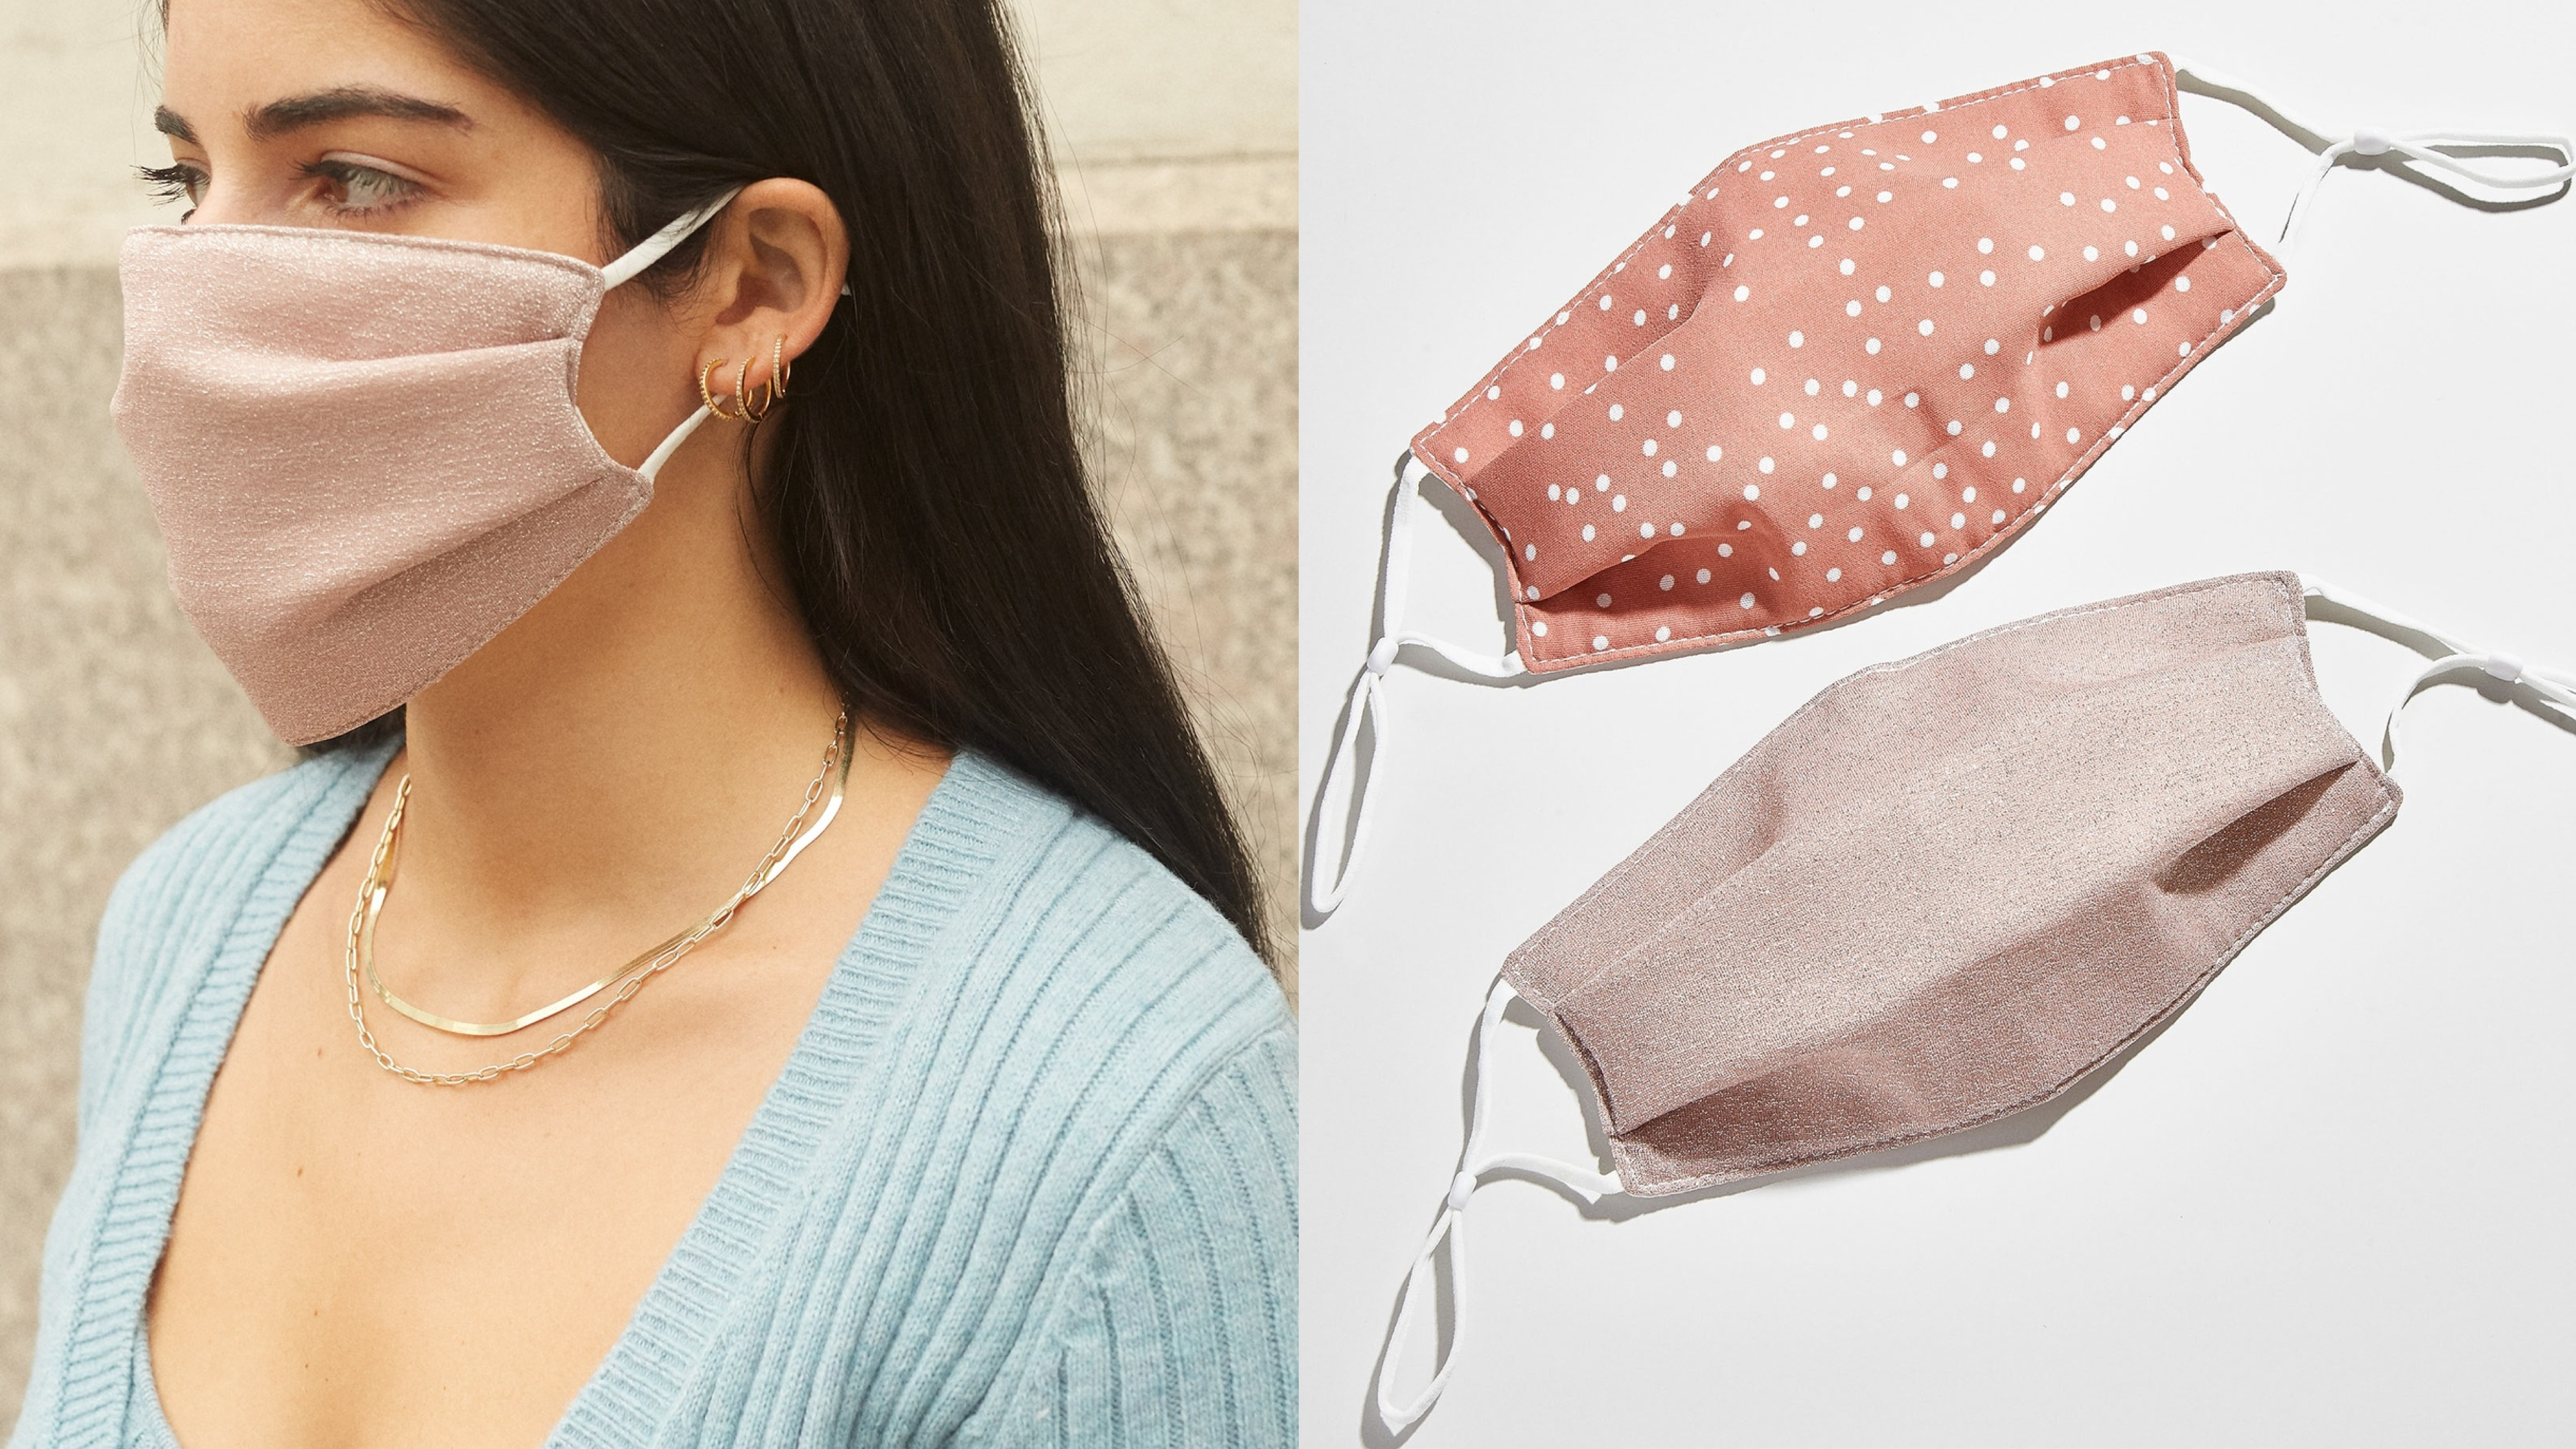 cloth face masks with patterns for double-layering